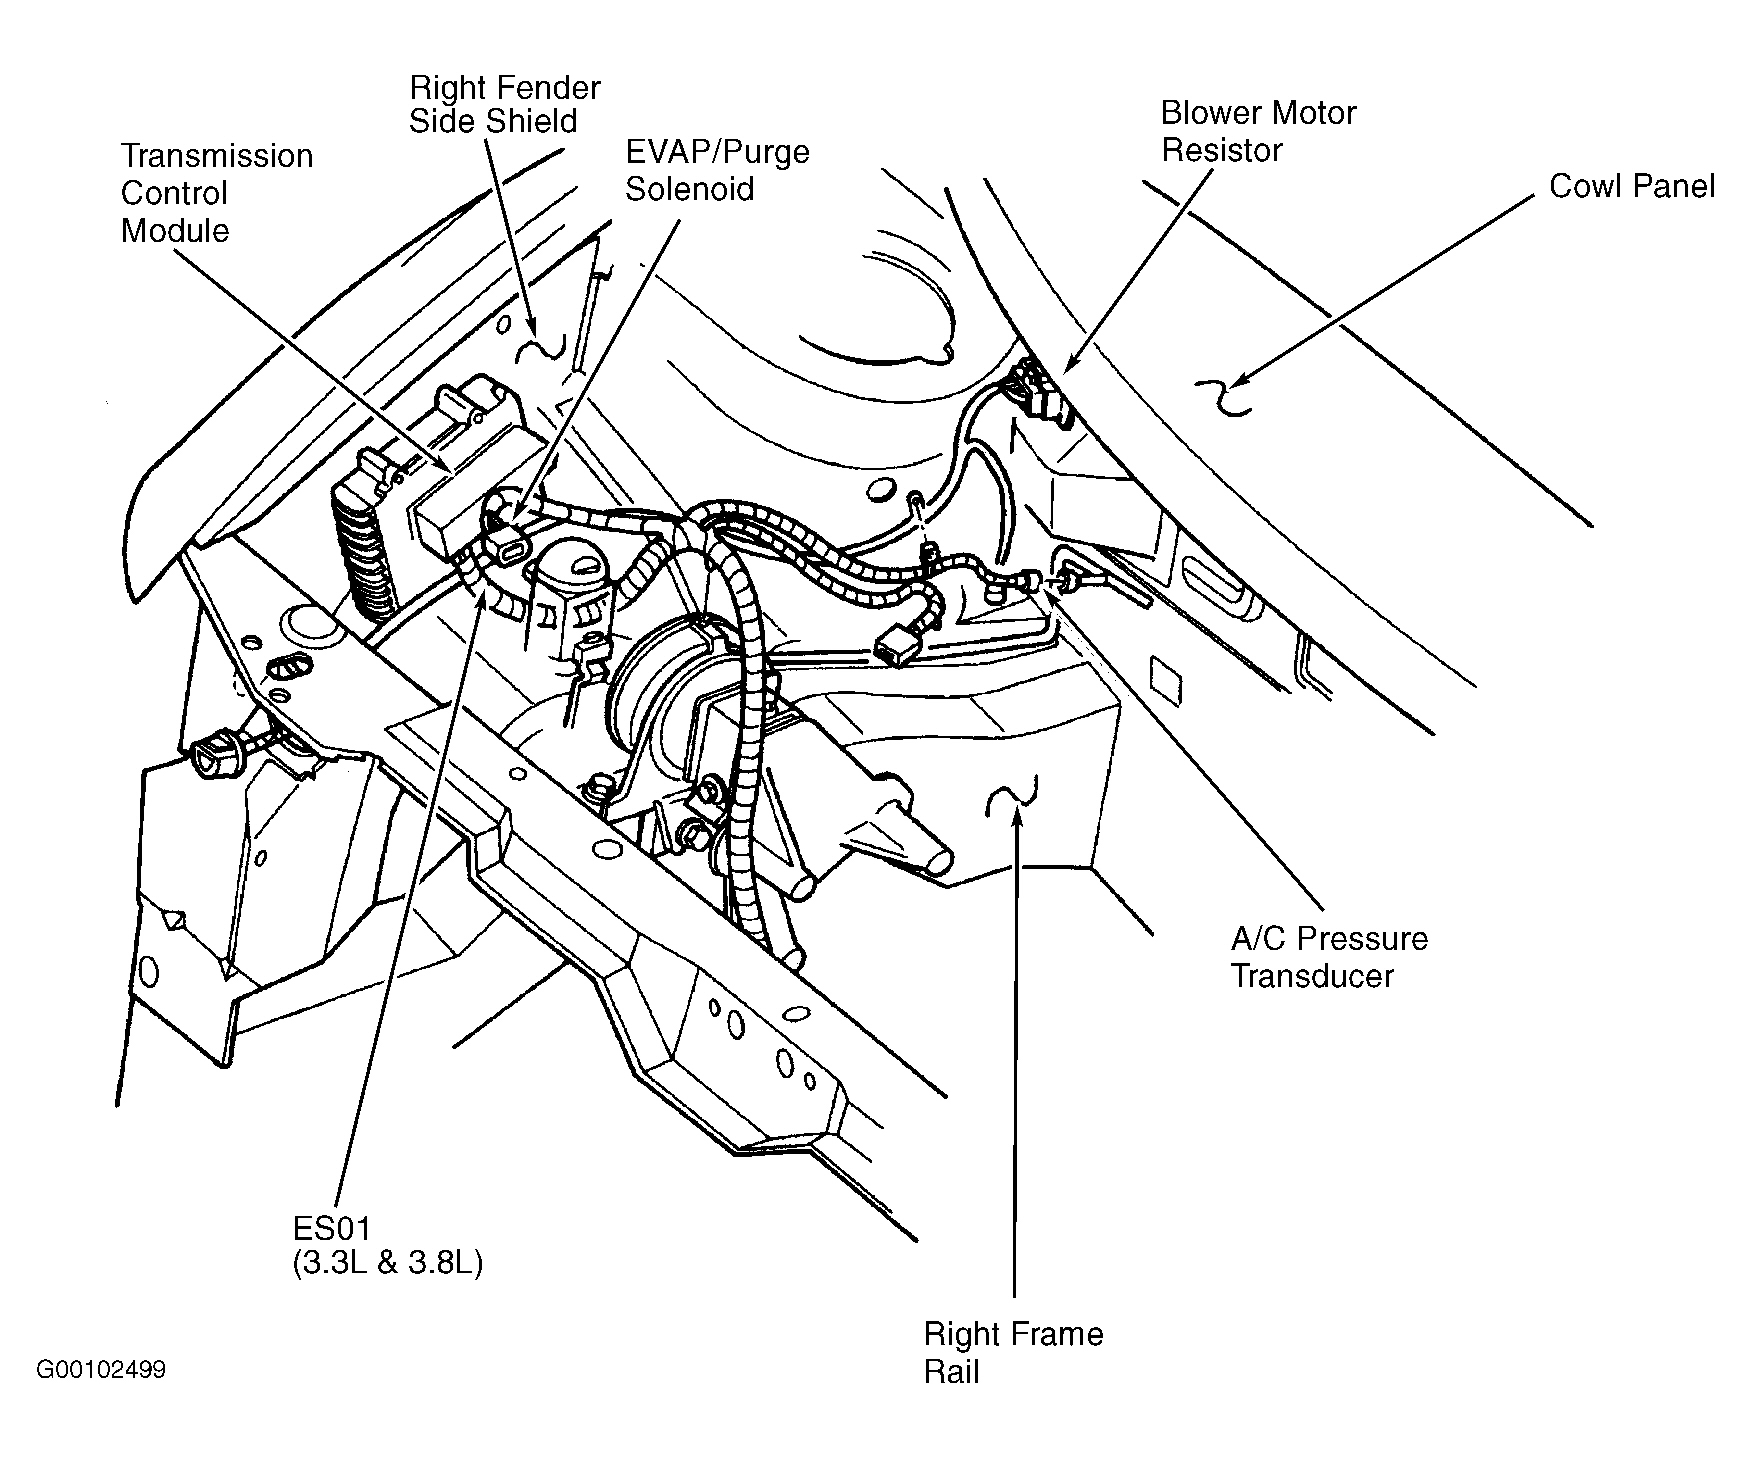 Dodge Caravan SE 1996 - Component Locations -  Right Side Of Engine Compartment